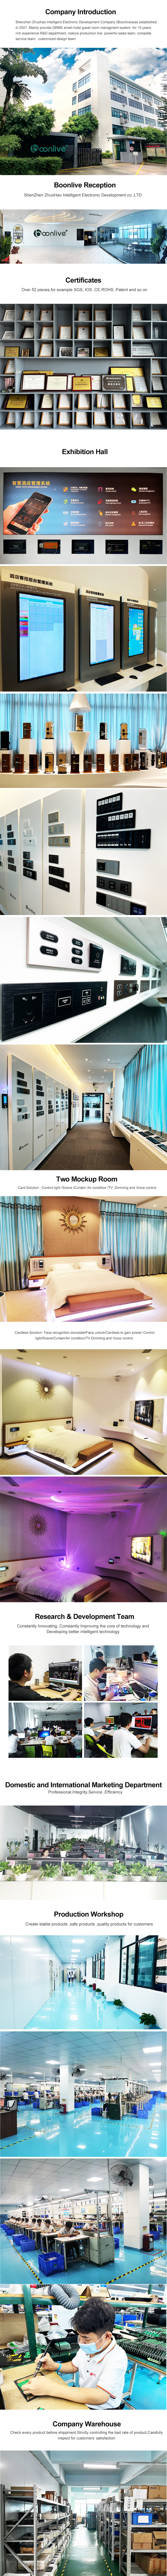 Room Control System Hotel